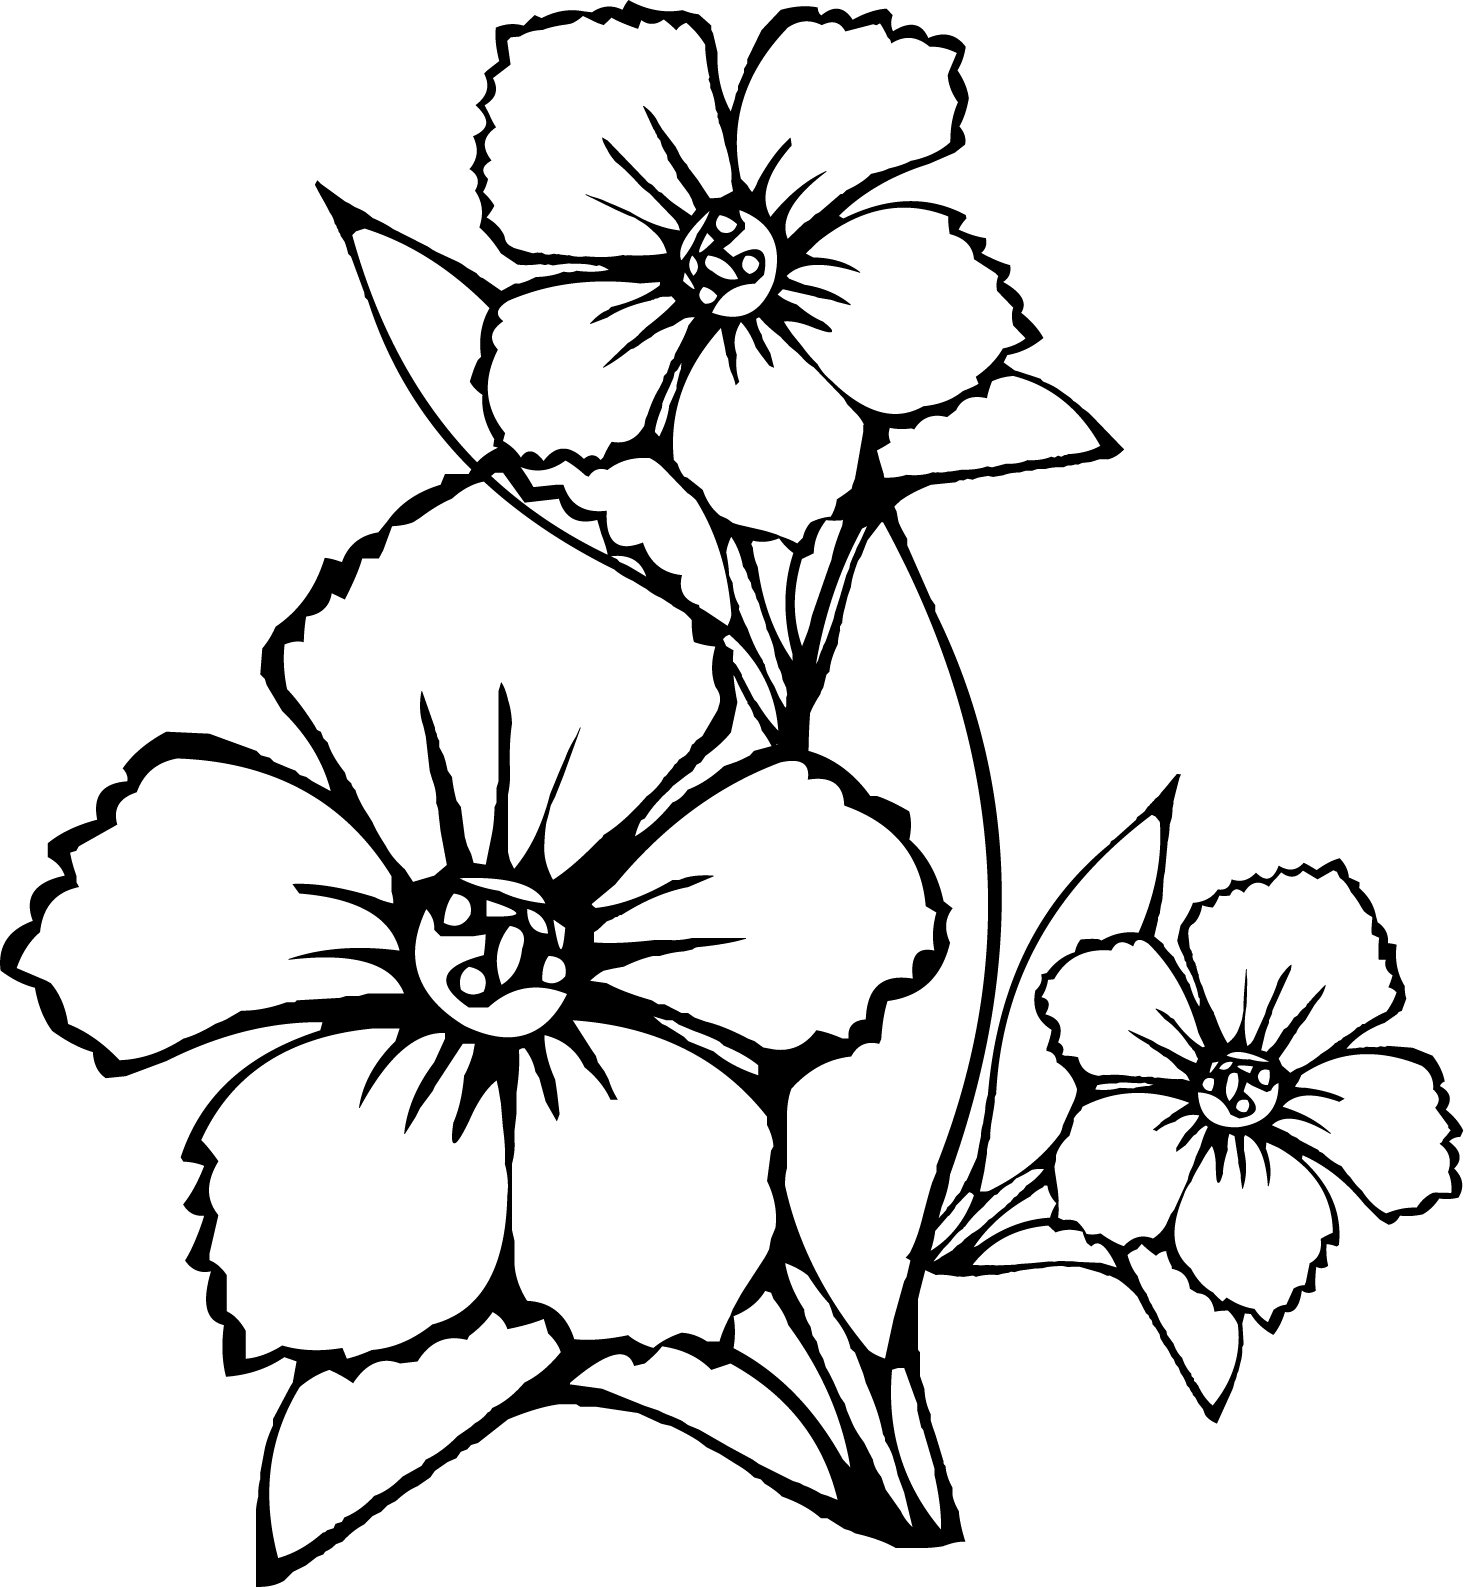 flower-coloring-pages-free-coloring-print-pages-geometric-coloring-pages